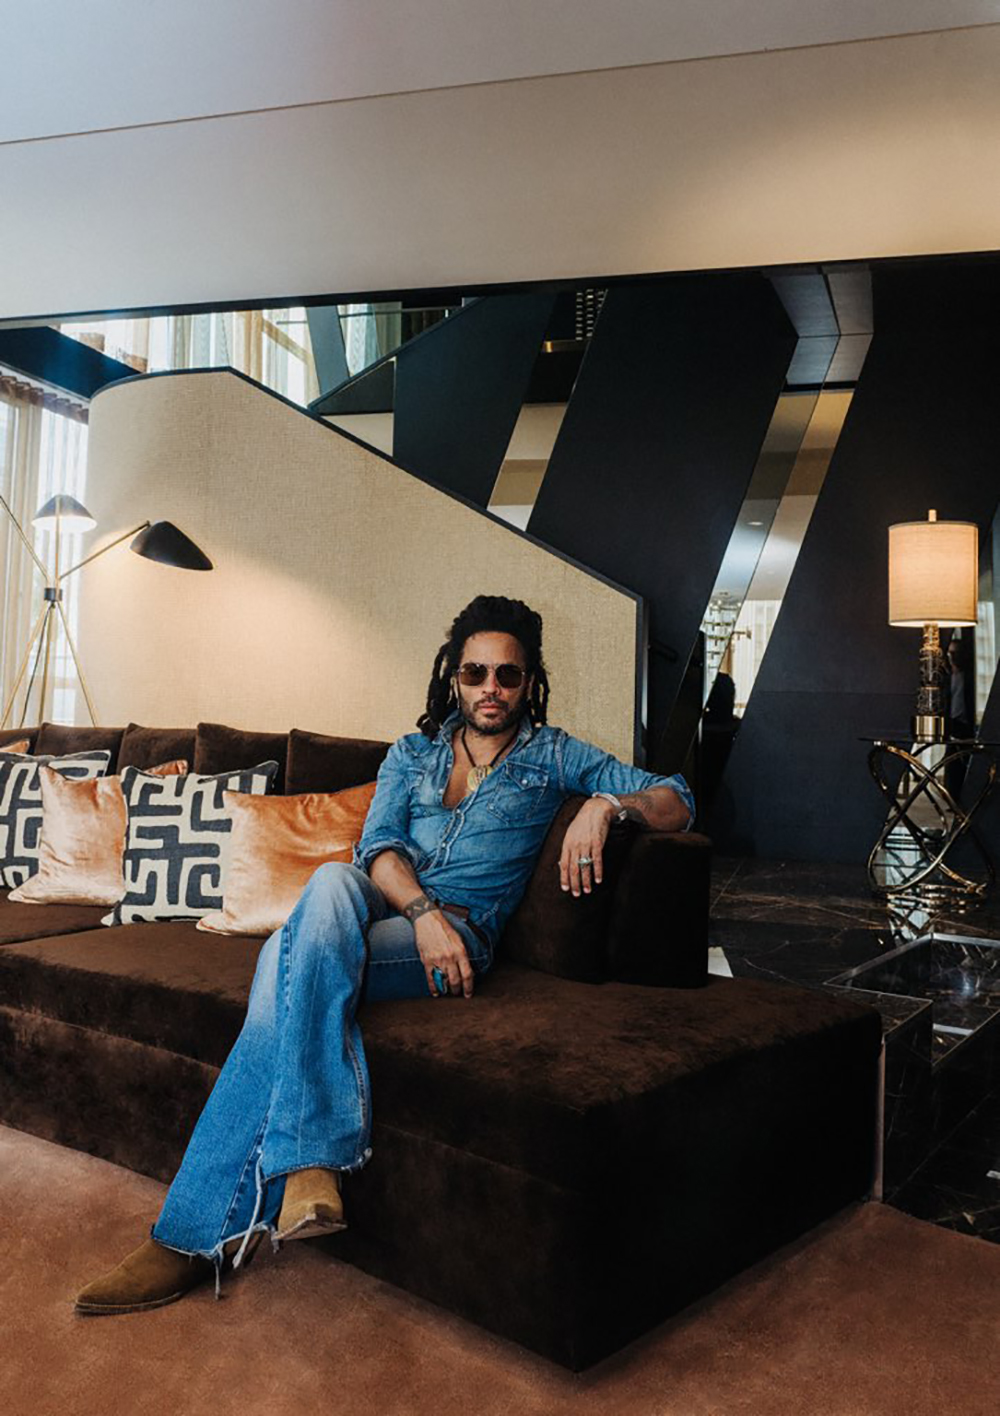 We Asked Lenny Kravitz About His Side Gig As An Interior